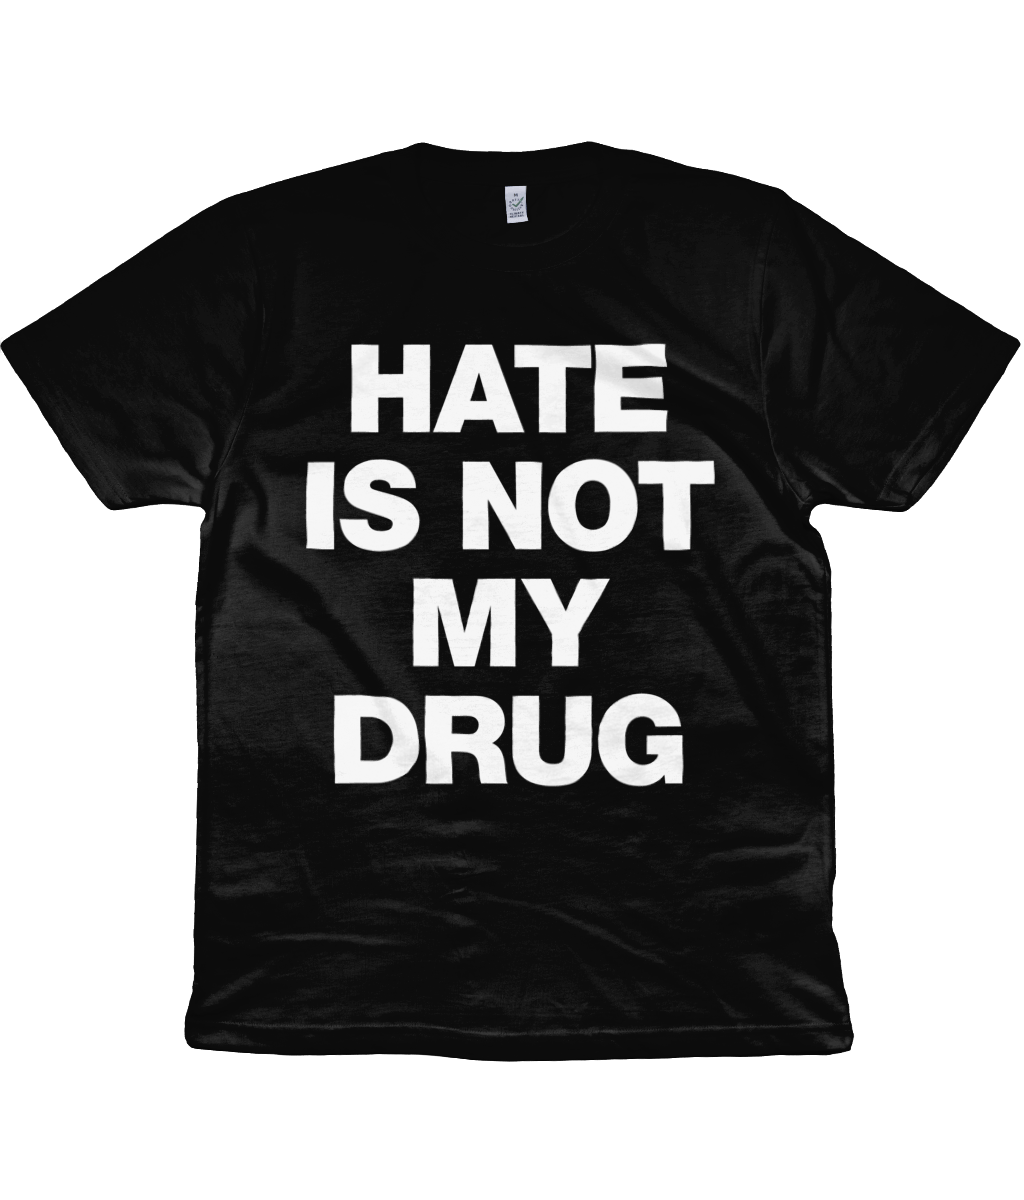 HATE IS NOT MY DRUG - White Text